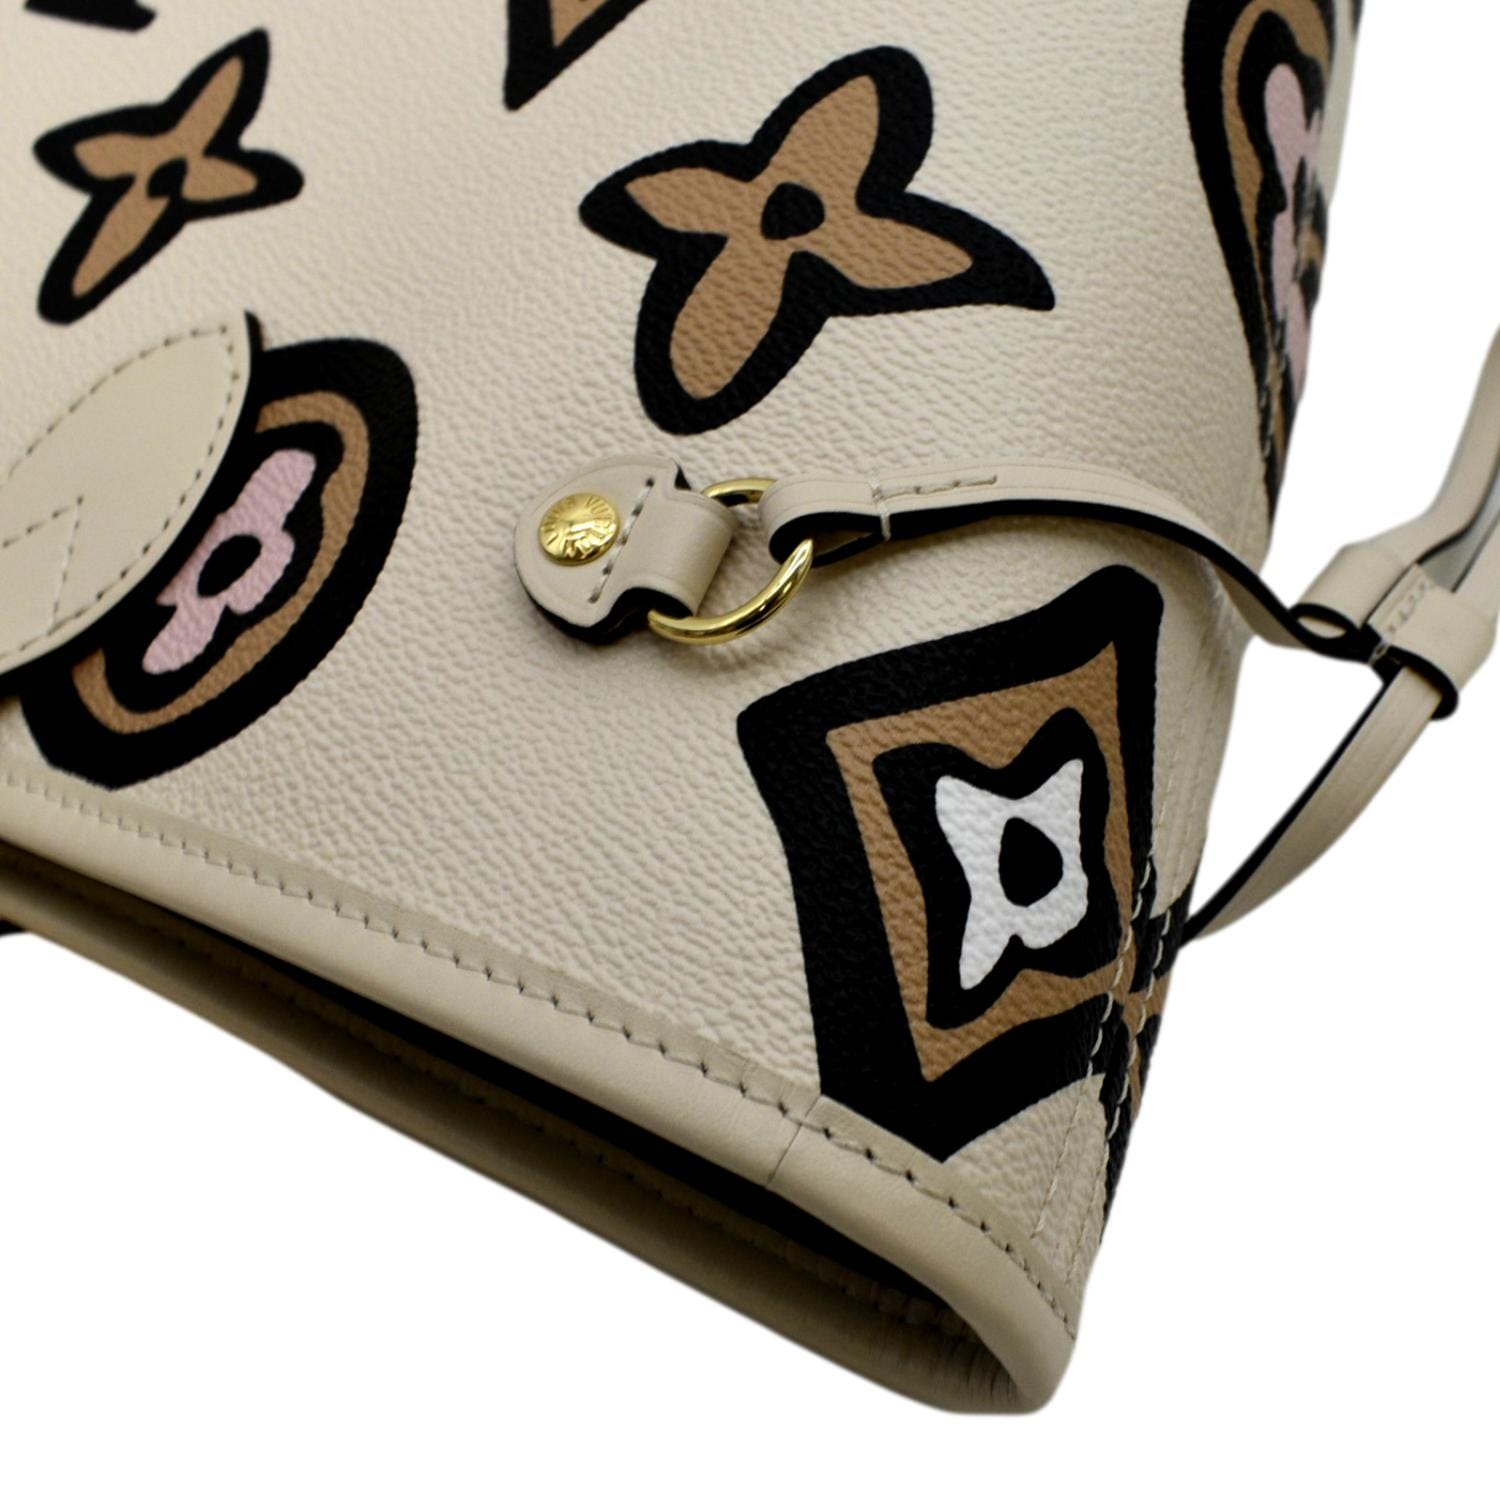 Louis Vuitton Monogram Giant Wild At Heart Neverfull MM Tote Black -  MyDesignerly